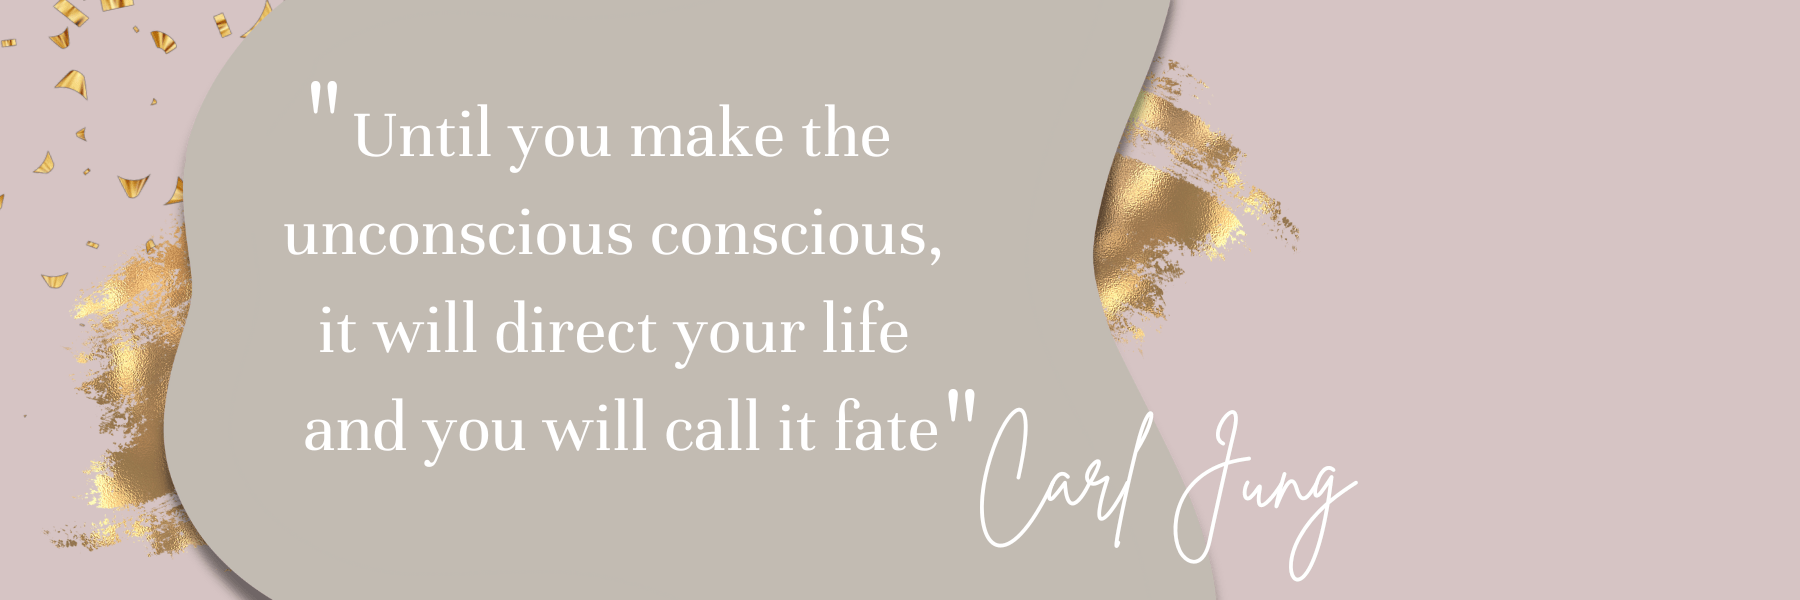 untill-you-make-the-unconcious-concious-it-will-direct-your-life-annd-you-will-call-it-fate-citat-Carl-Jung